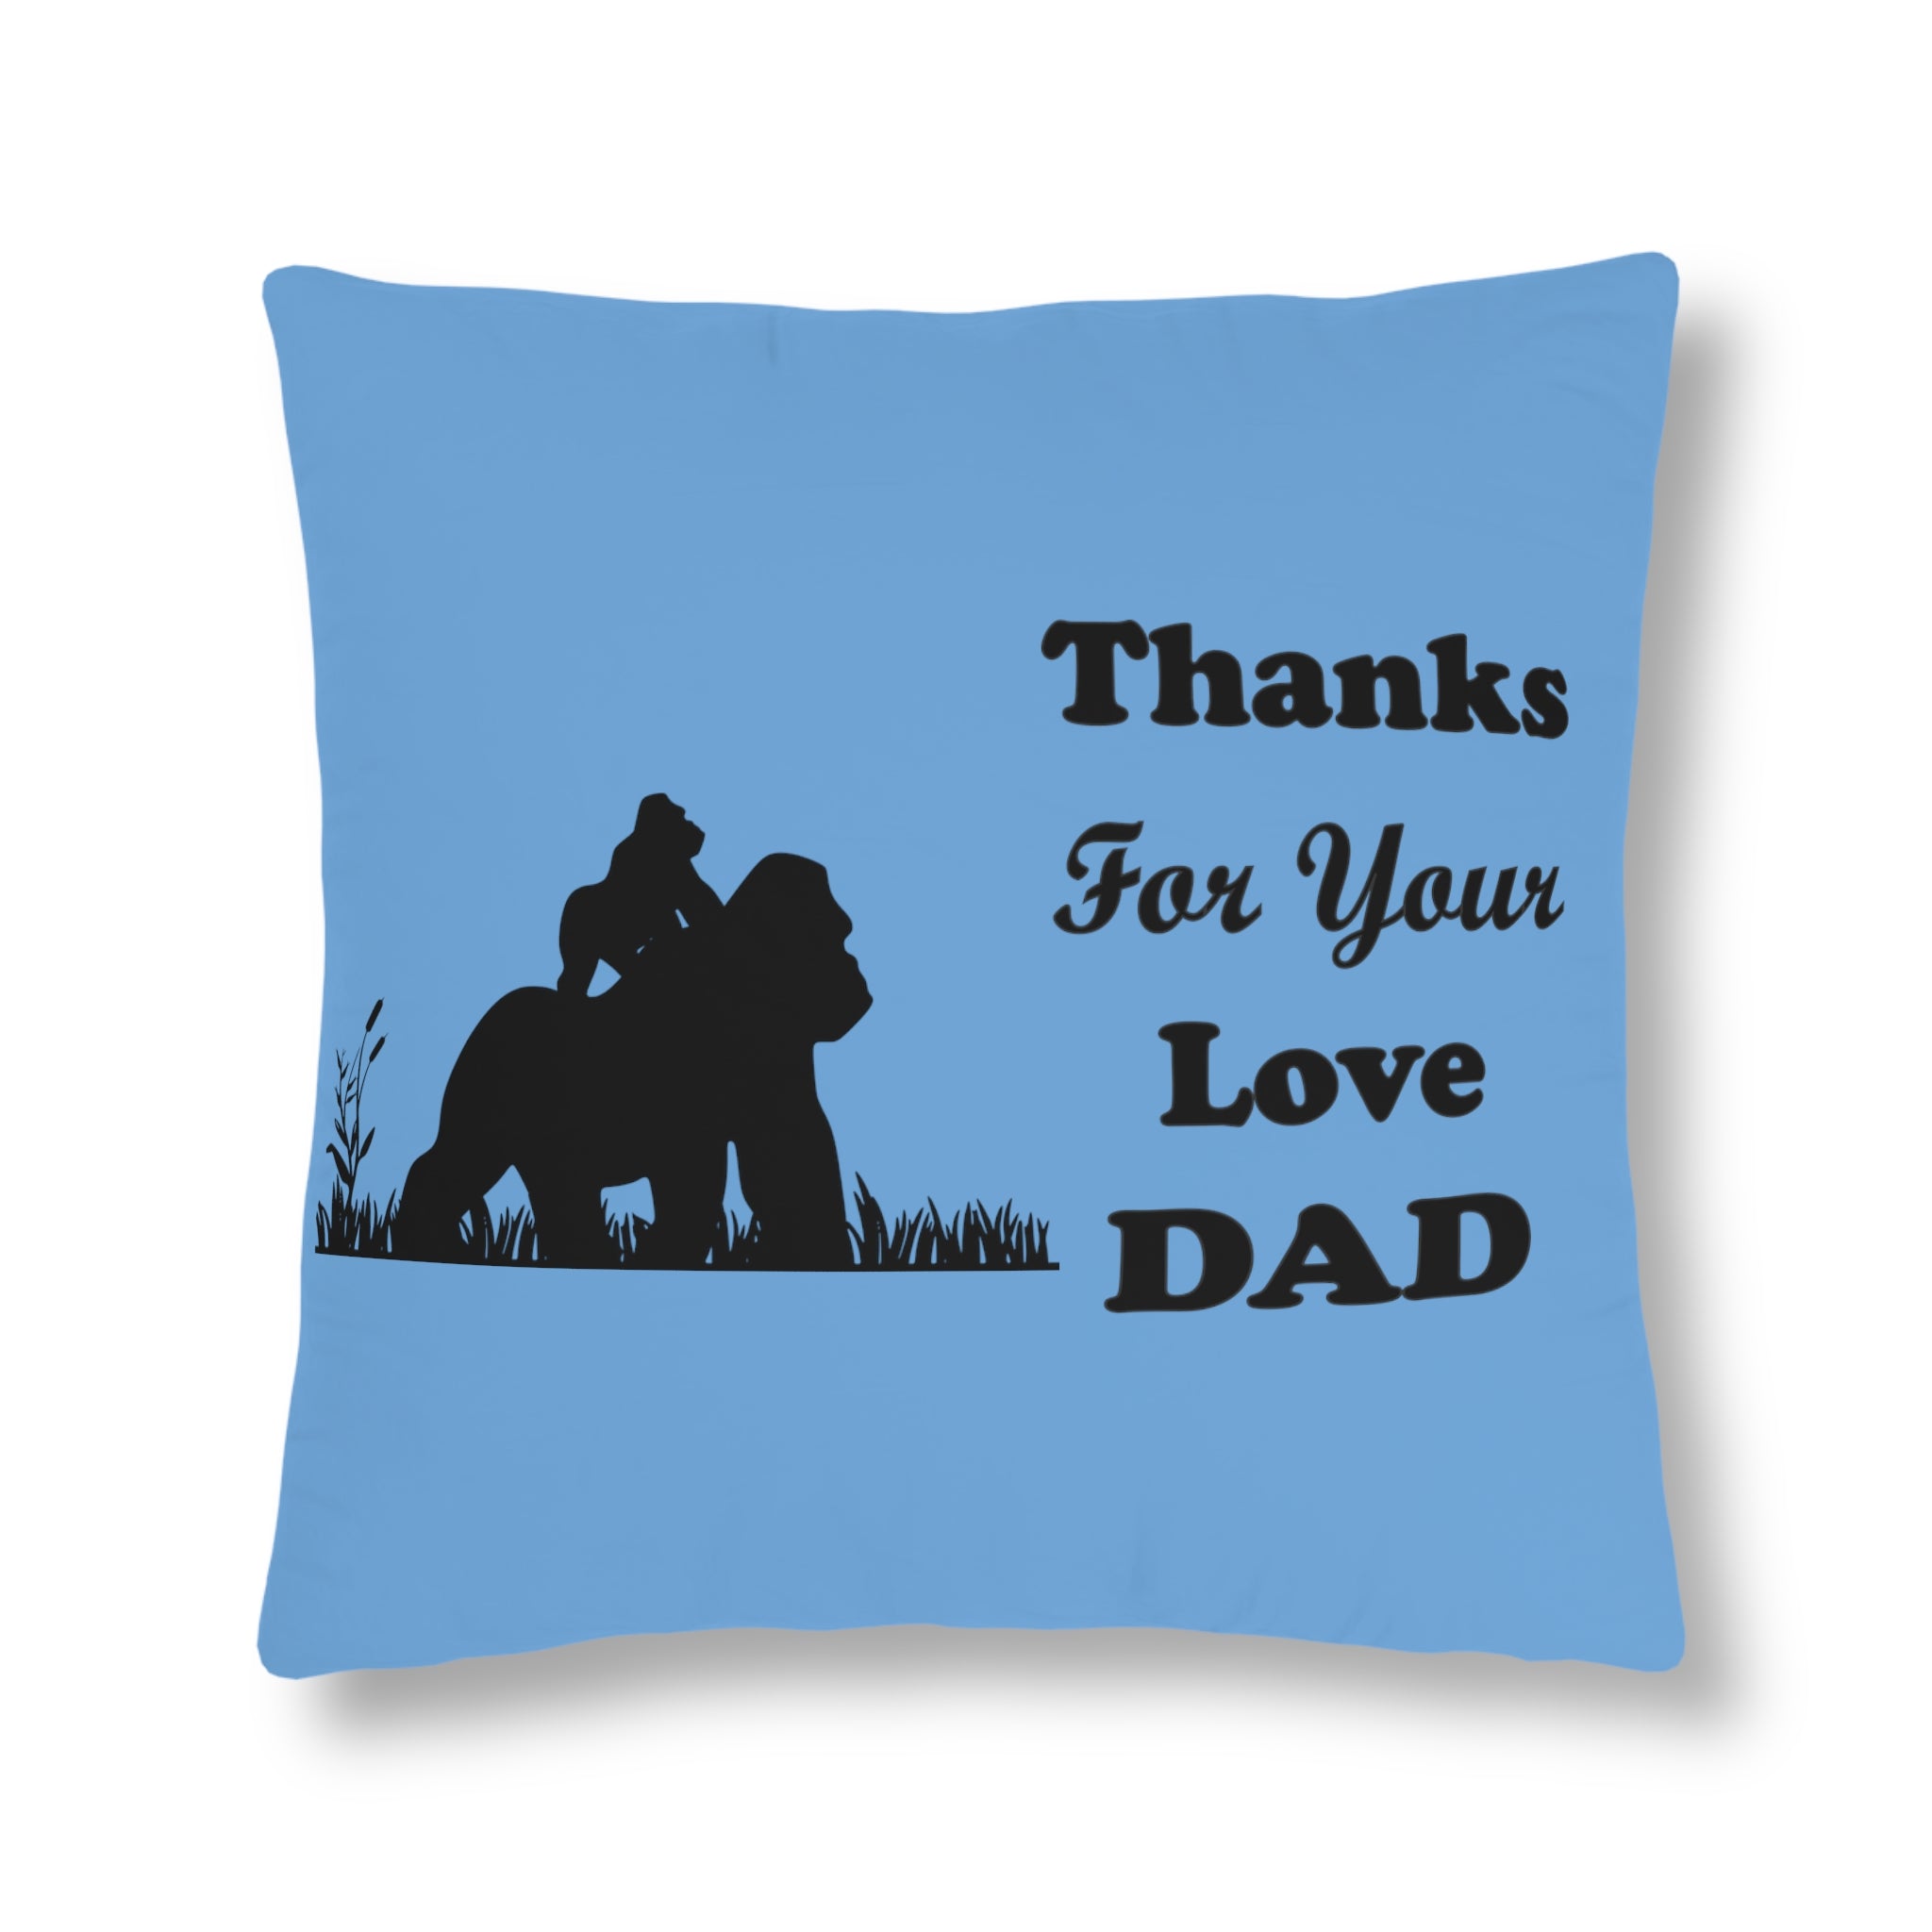 Waterproof Pillows - Thanks For the Love Dad (Gorilla)